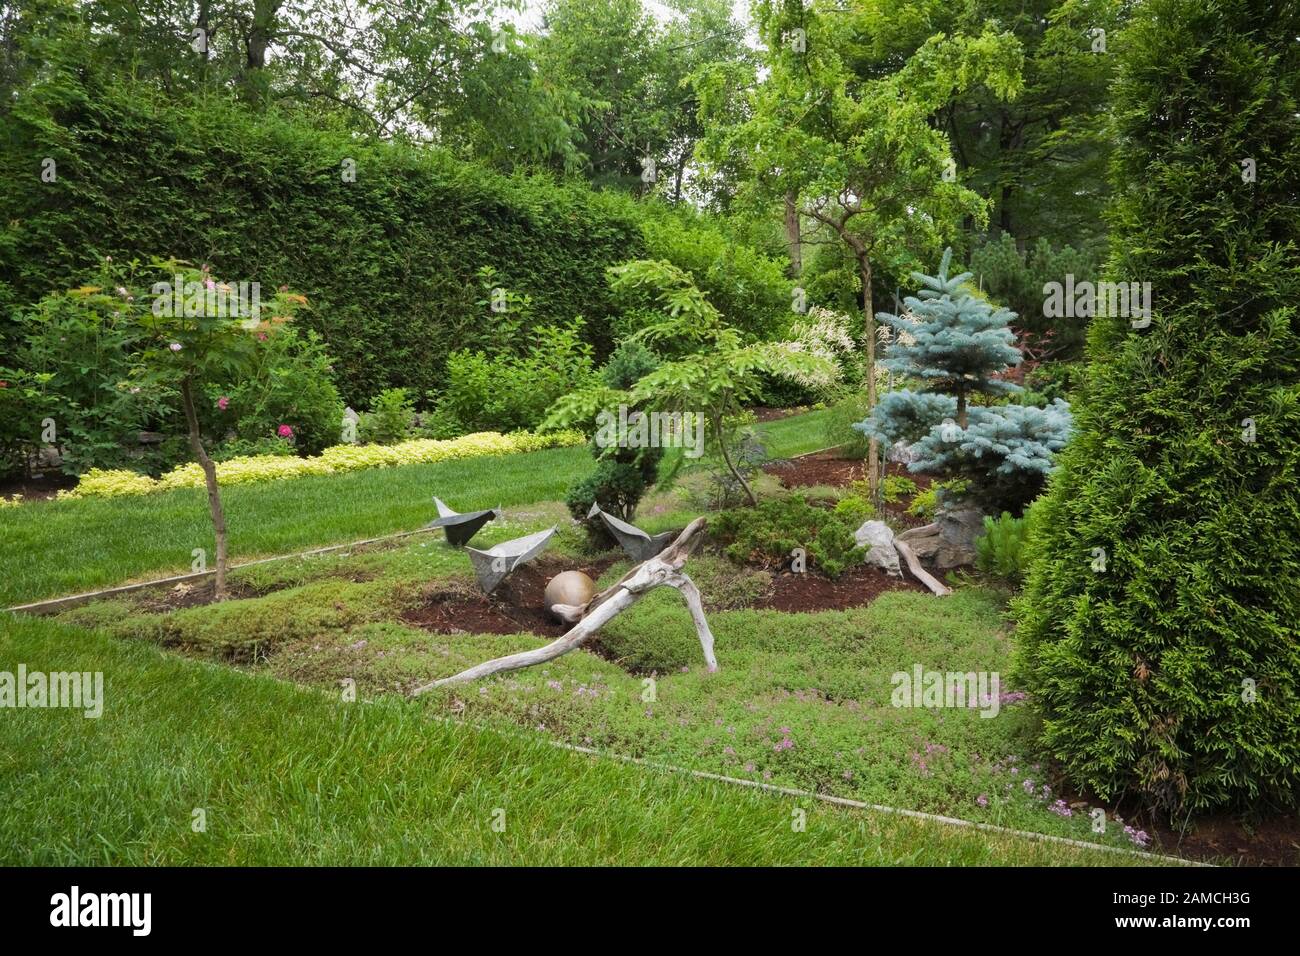 Manicured green grass lawn and wood and metal sculptures in border planted with Thuja occidentalis - Cedar and Picea pungens - Colorado Spruce trees. Stock Photo